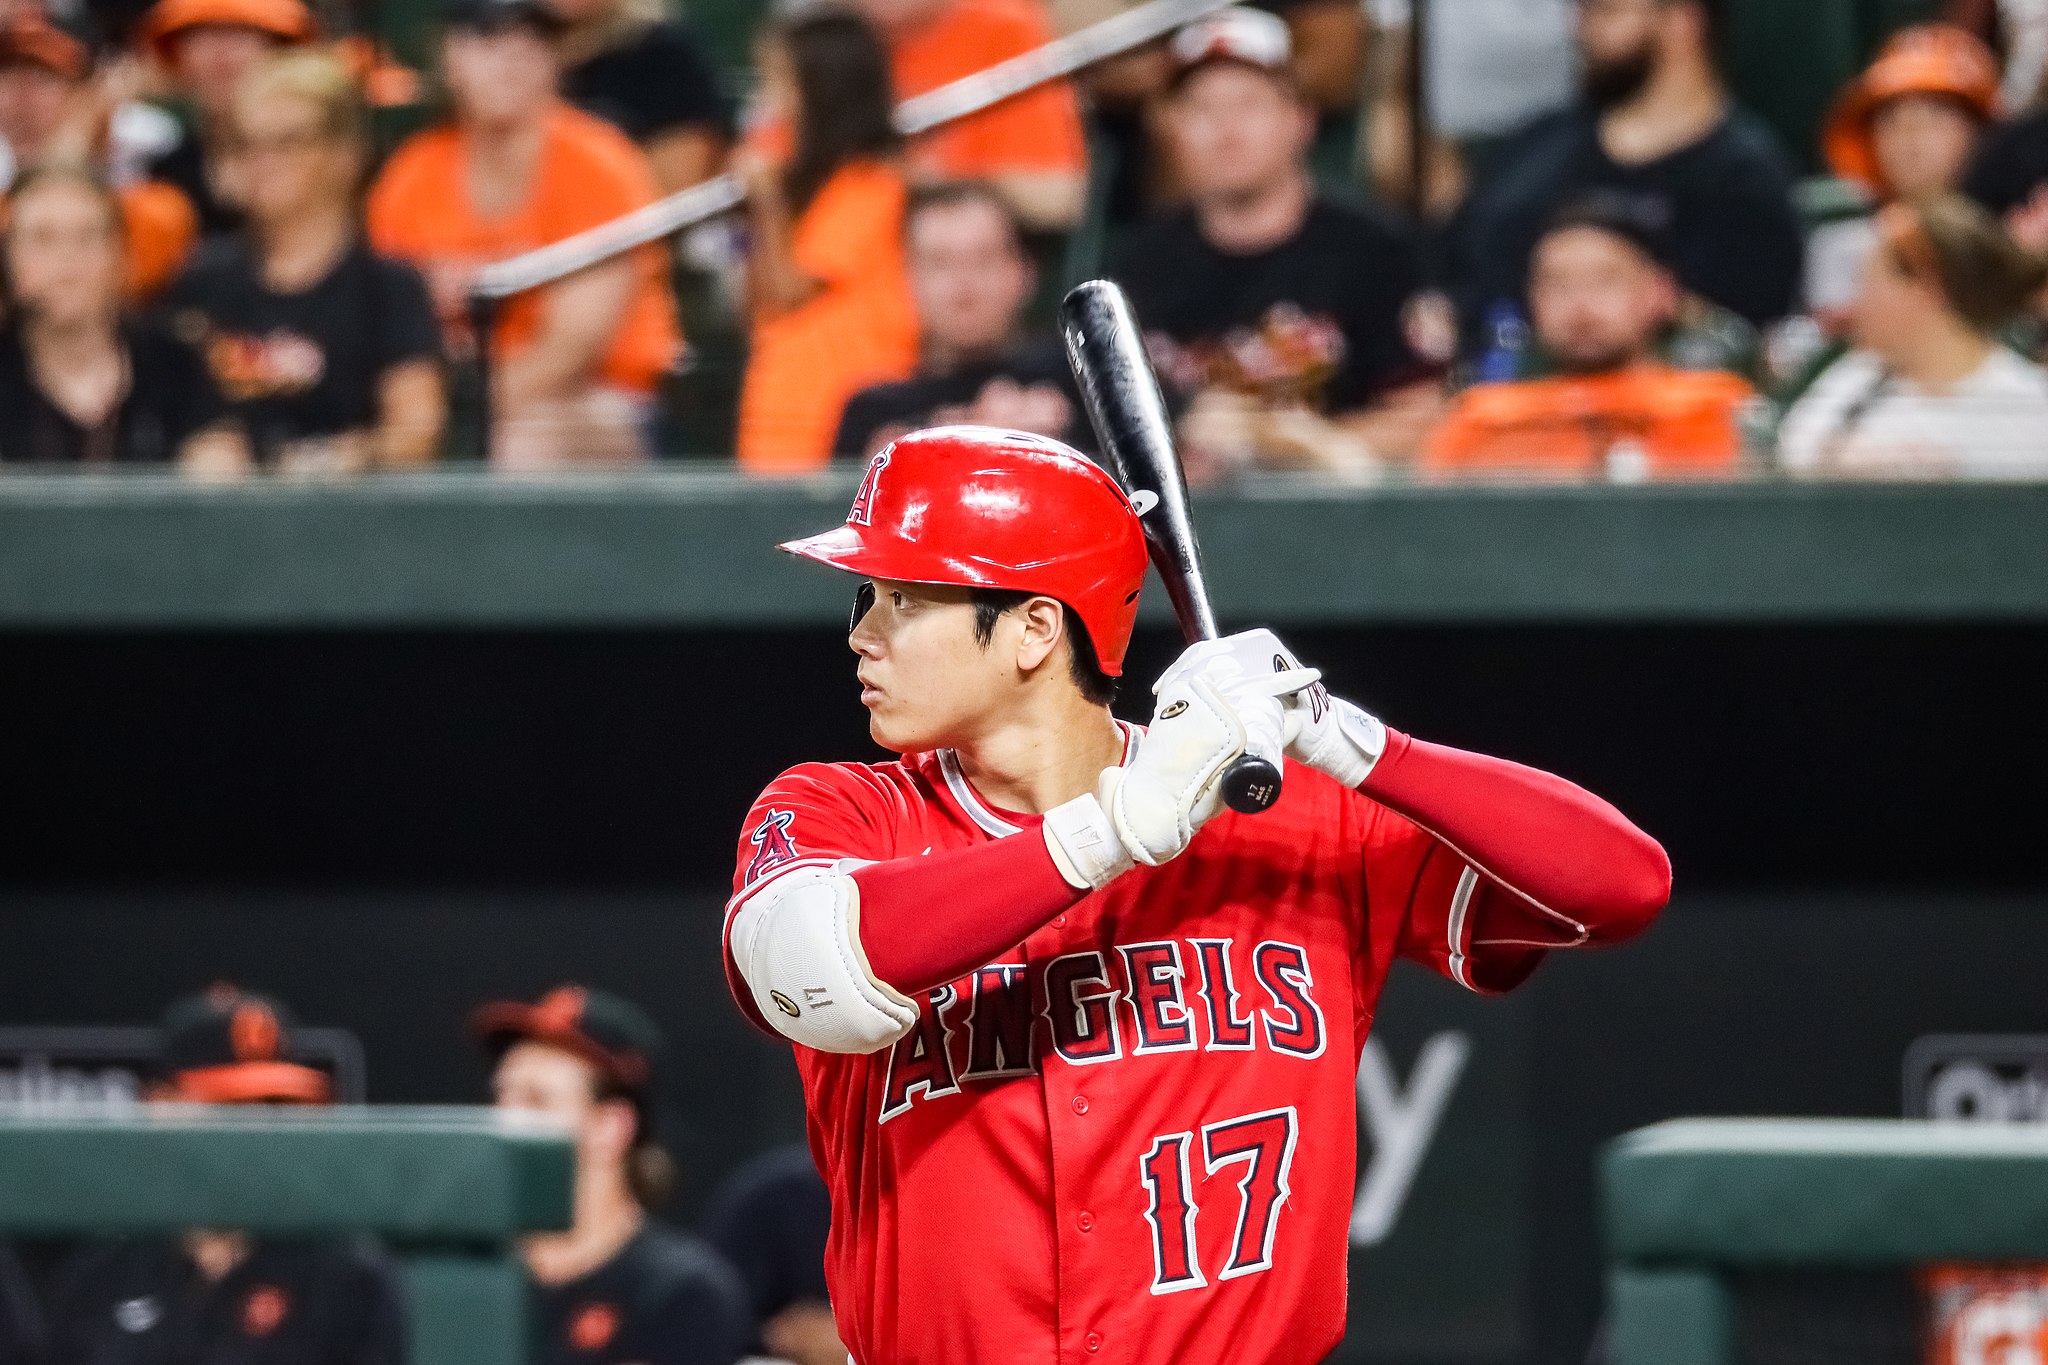 After Babe Ruth, the Japanese Shohei Ohtani becomes baseball's first  two-way player in 100 years